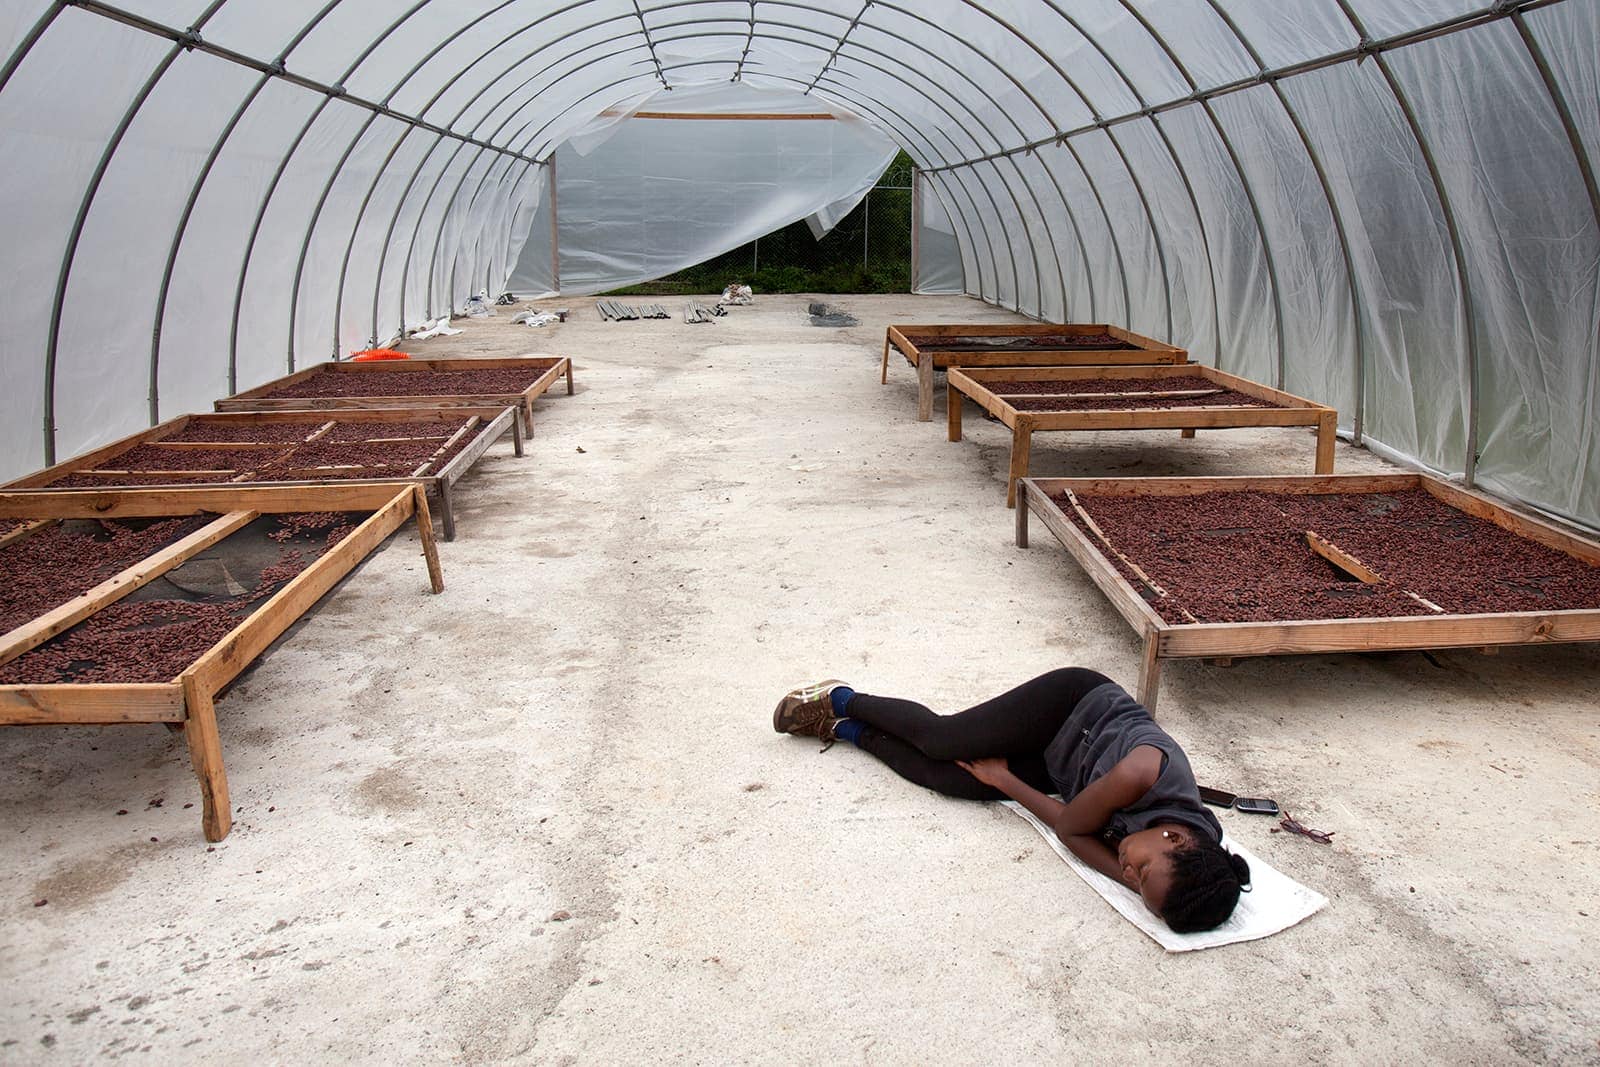 A woman napping on the floor of a room with pots of soil.